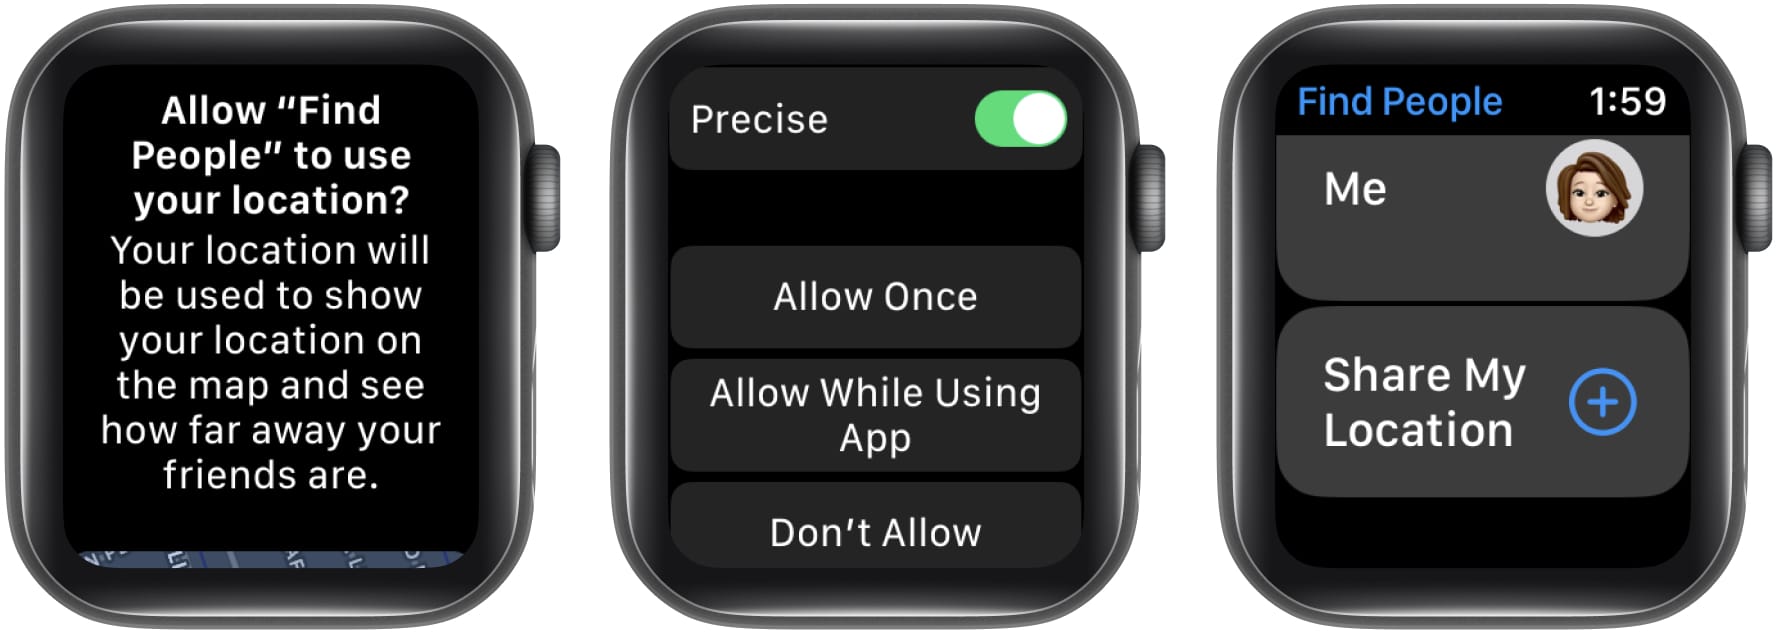 Pick Share My Location from Find People App on Apple Watch